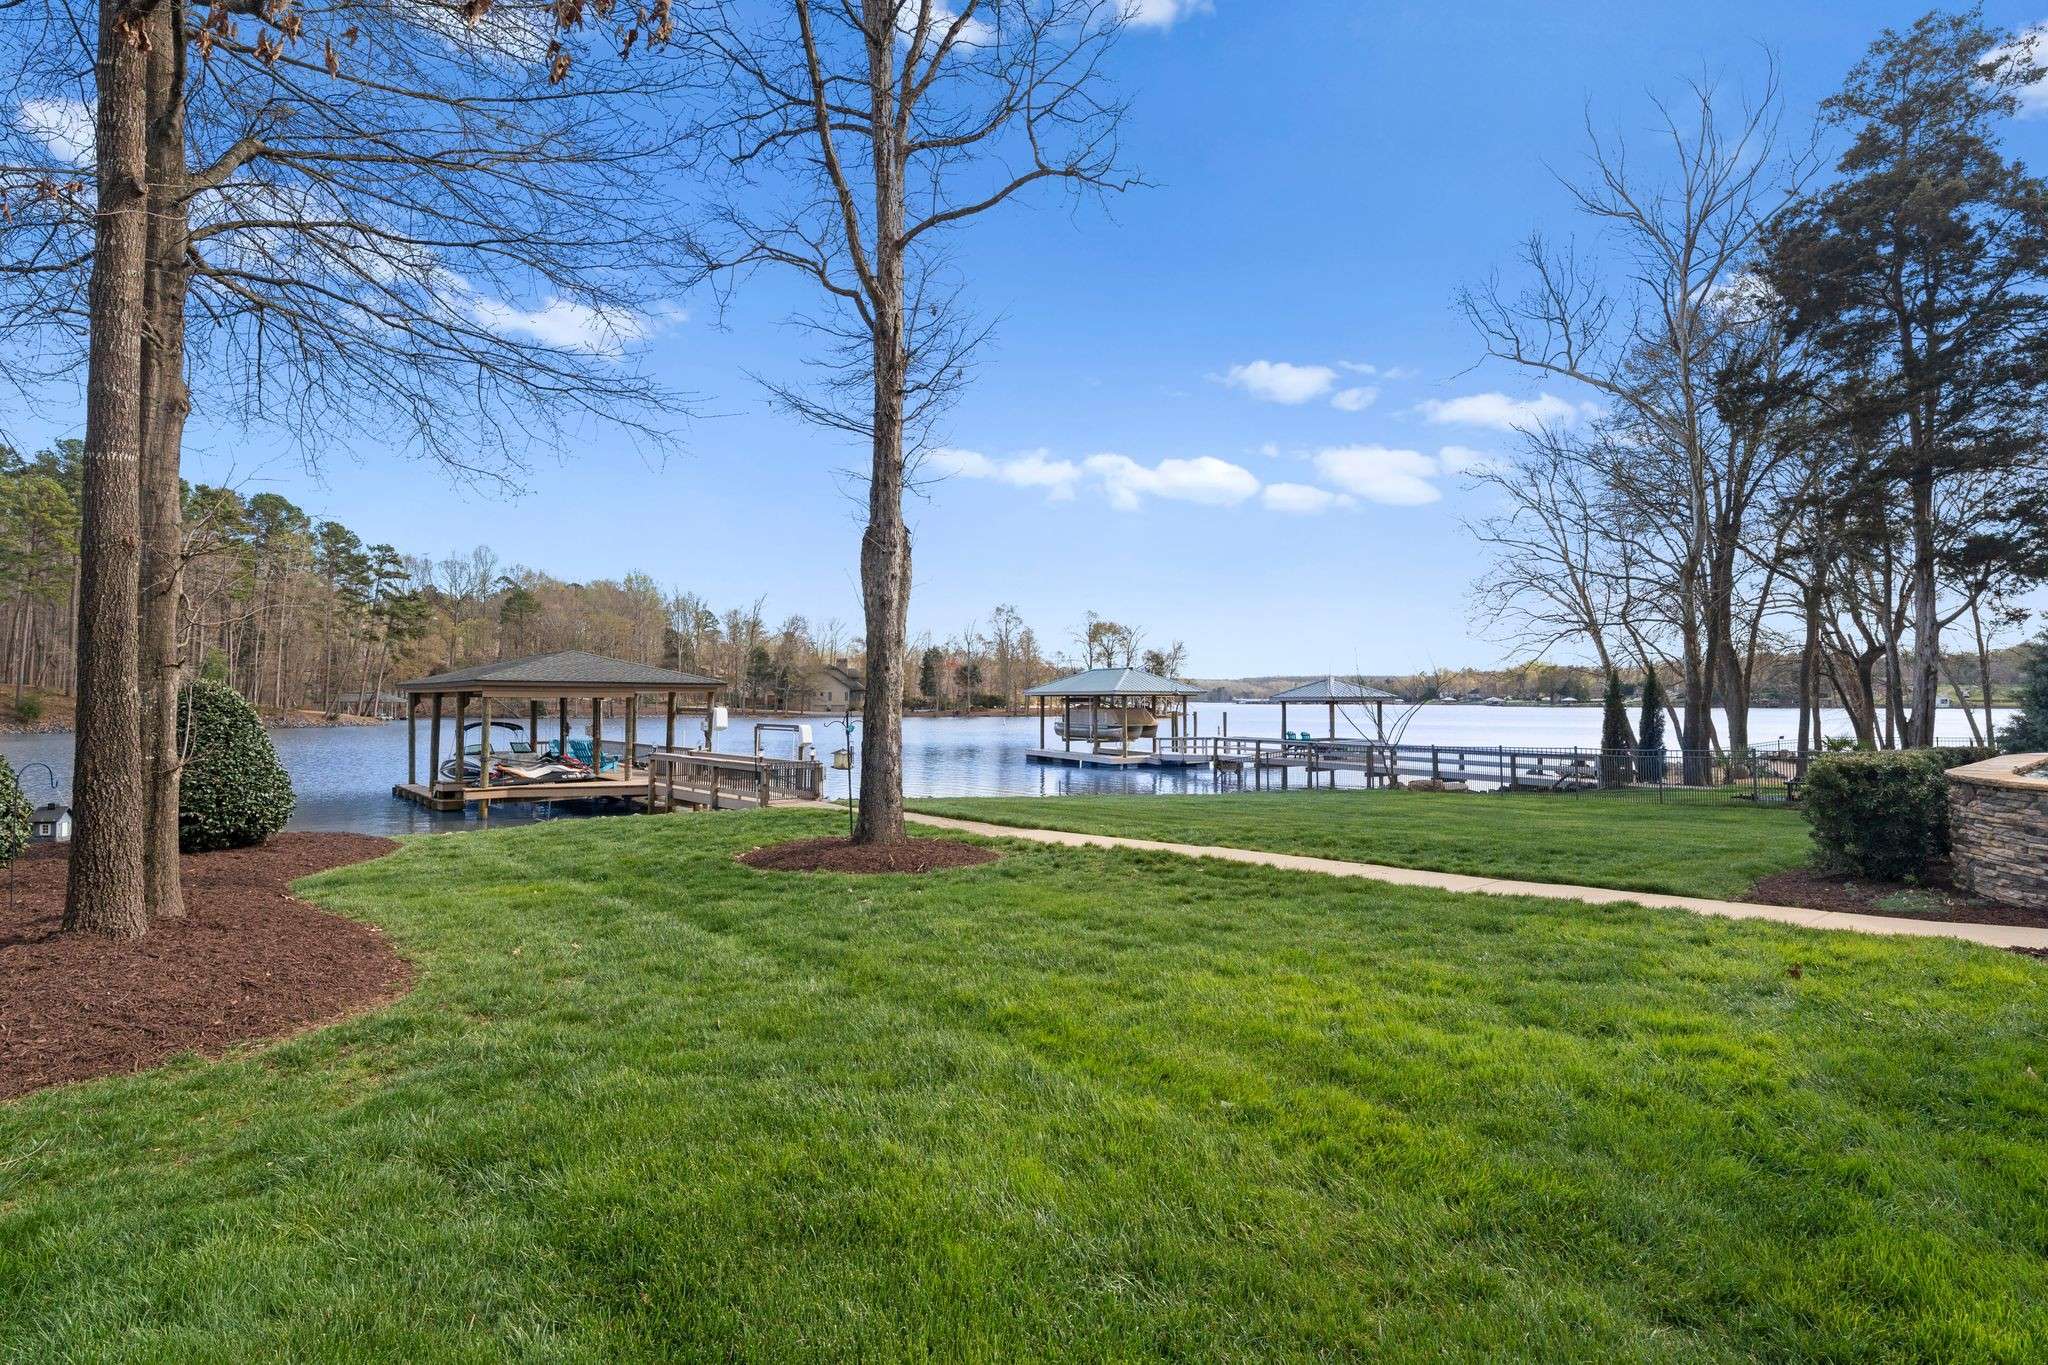 59 of 79. Exterior Day Time Photo - 846 Armstrong Rd - View of Beautifully landscaped flat backyard, with completely unobstructed views of Lake Wylie